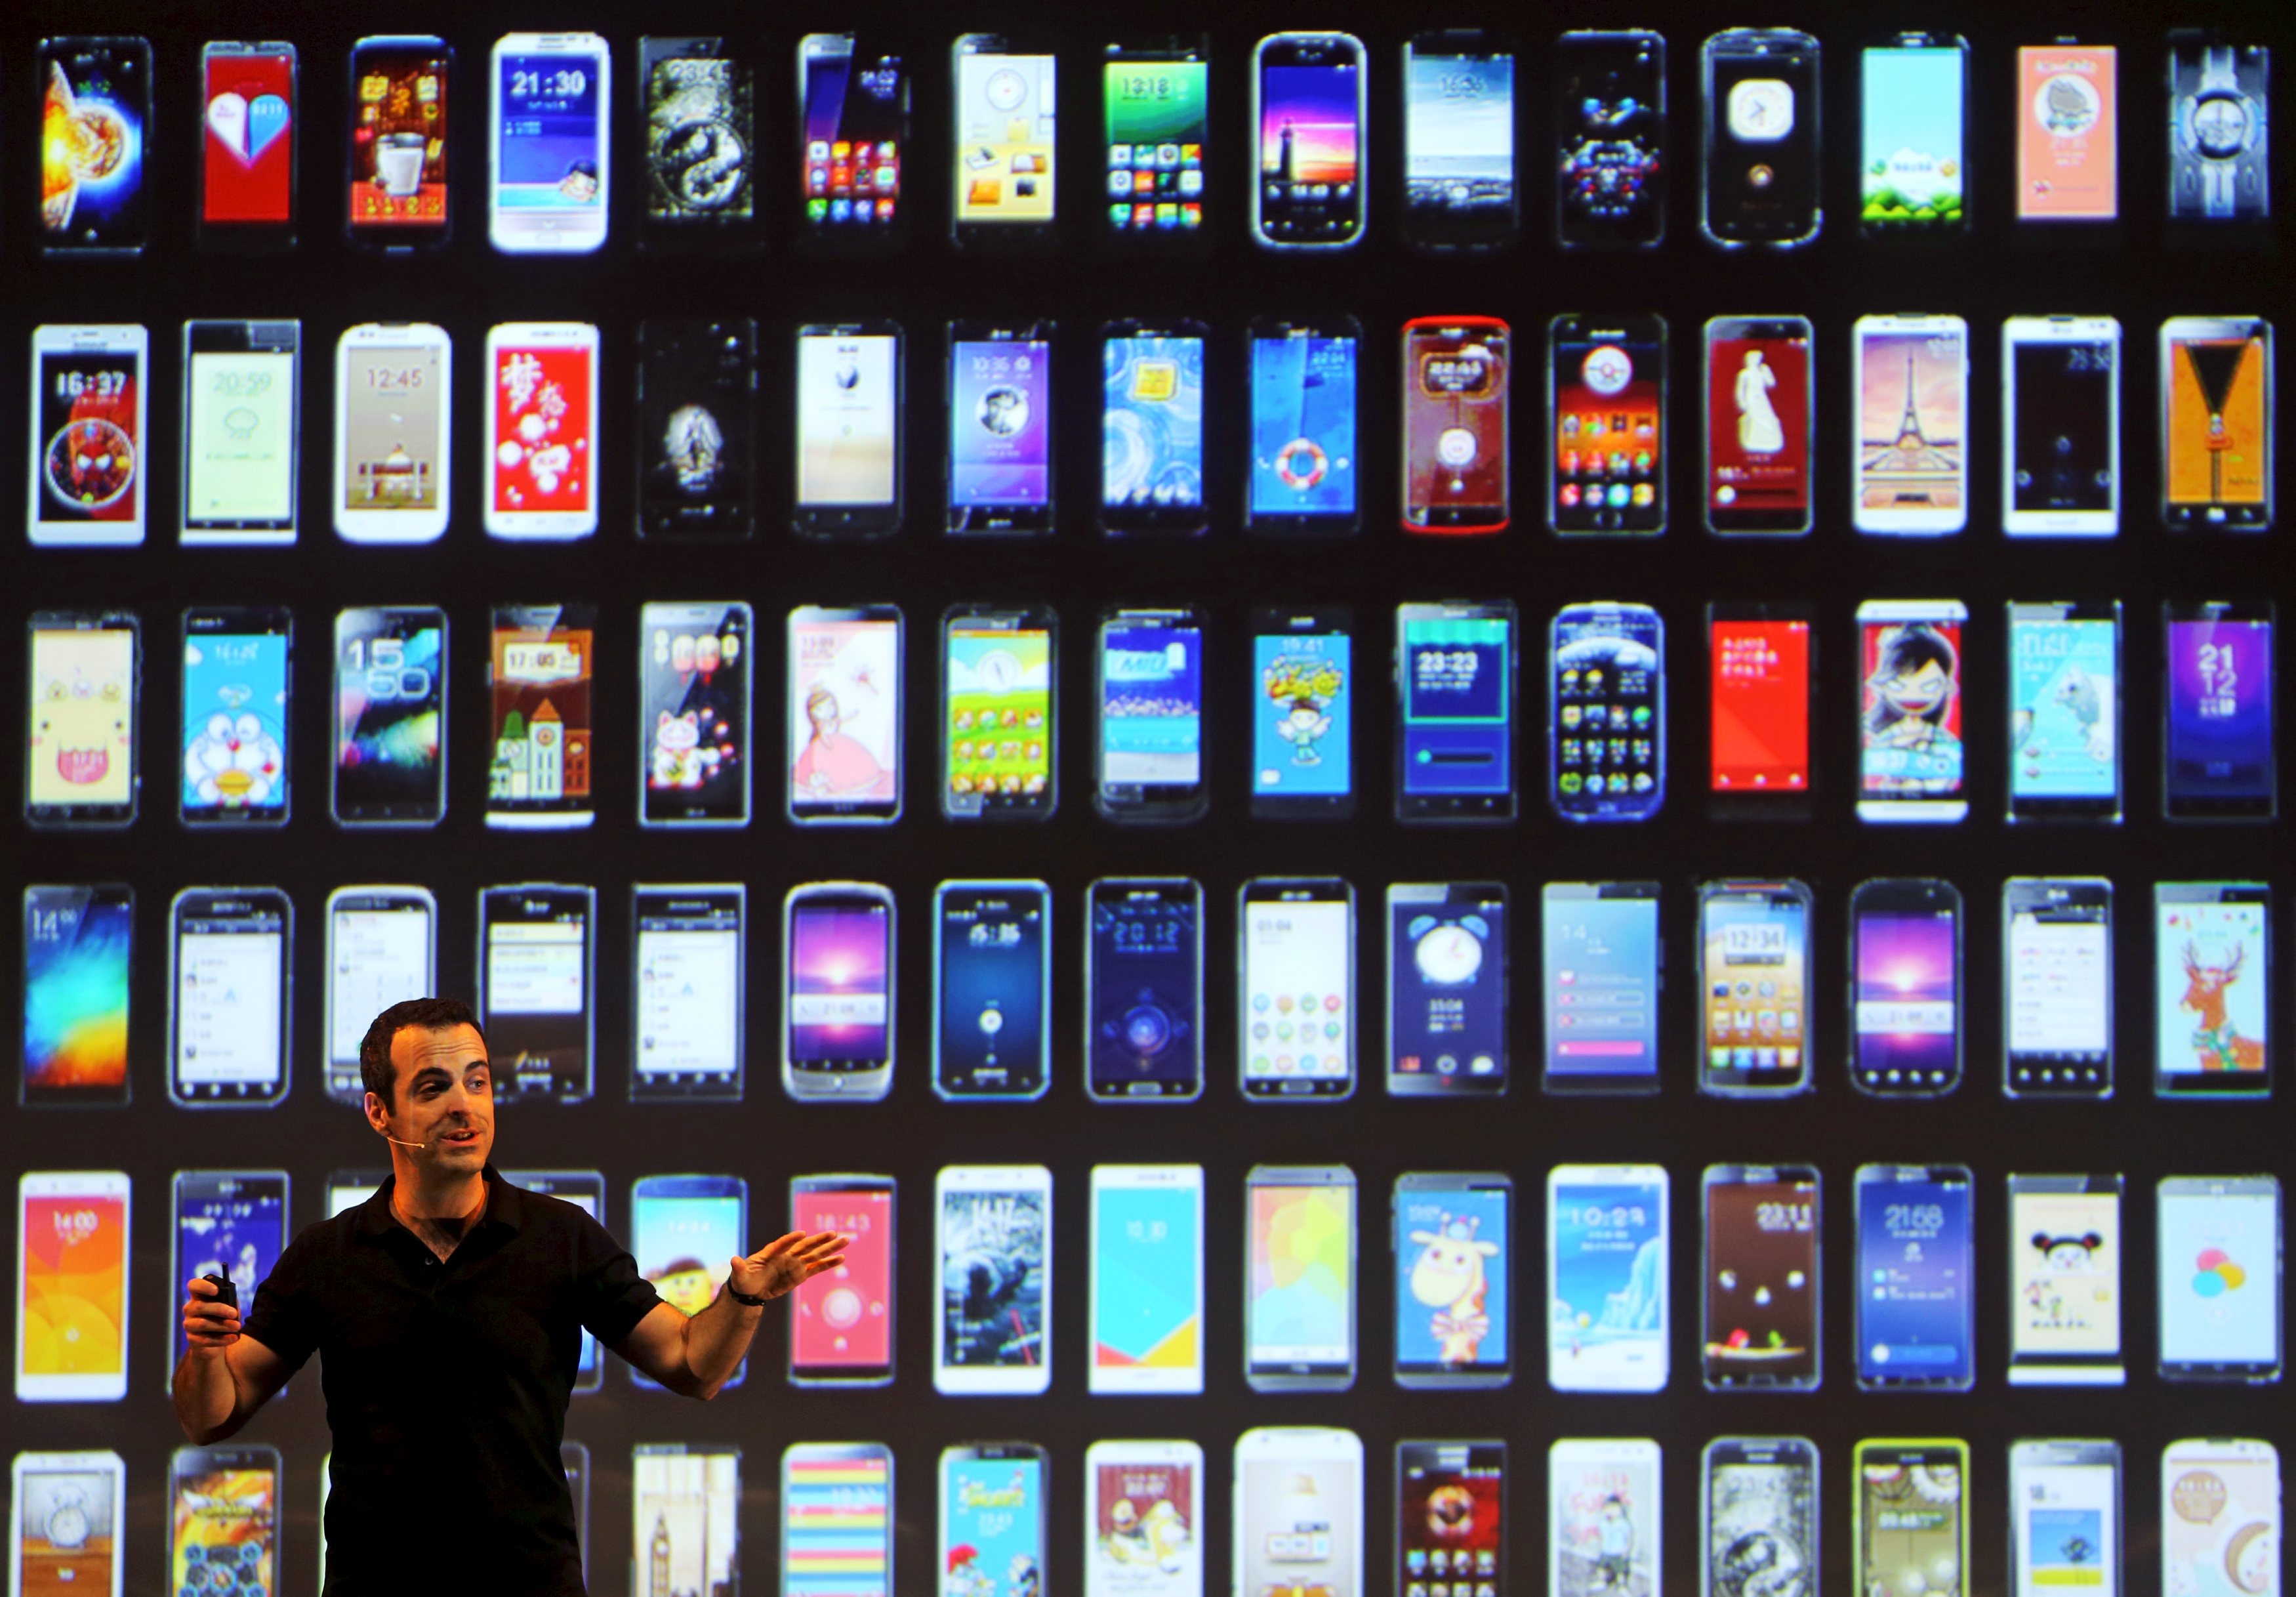 Brazil's Hugo Barra, vice president of international operations for Chinese smartphone maker Xiaomi, speaks during a news conference in Sao Paulo, Brazil, June 30, 2015. Chinese smartphone maker Xiaomi has started making devices in Brazil, a senior executive said on Tuesday, in an effort to evade steep import tariffs that have pushed up prices and slowed smartphone adoption in the country. REUTERS/Paulo Whitaker